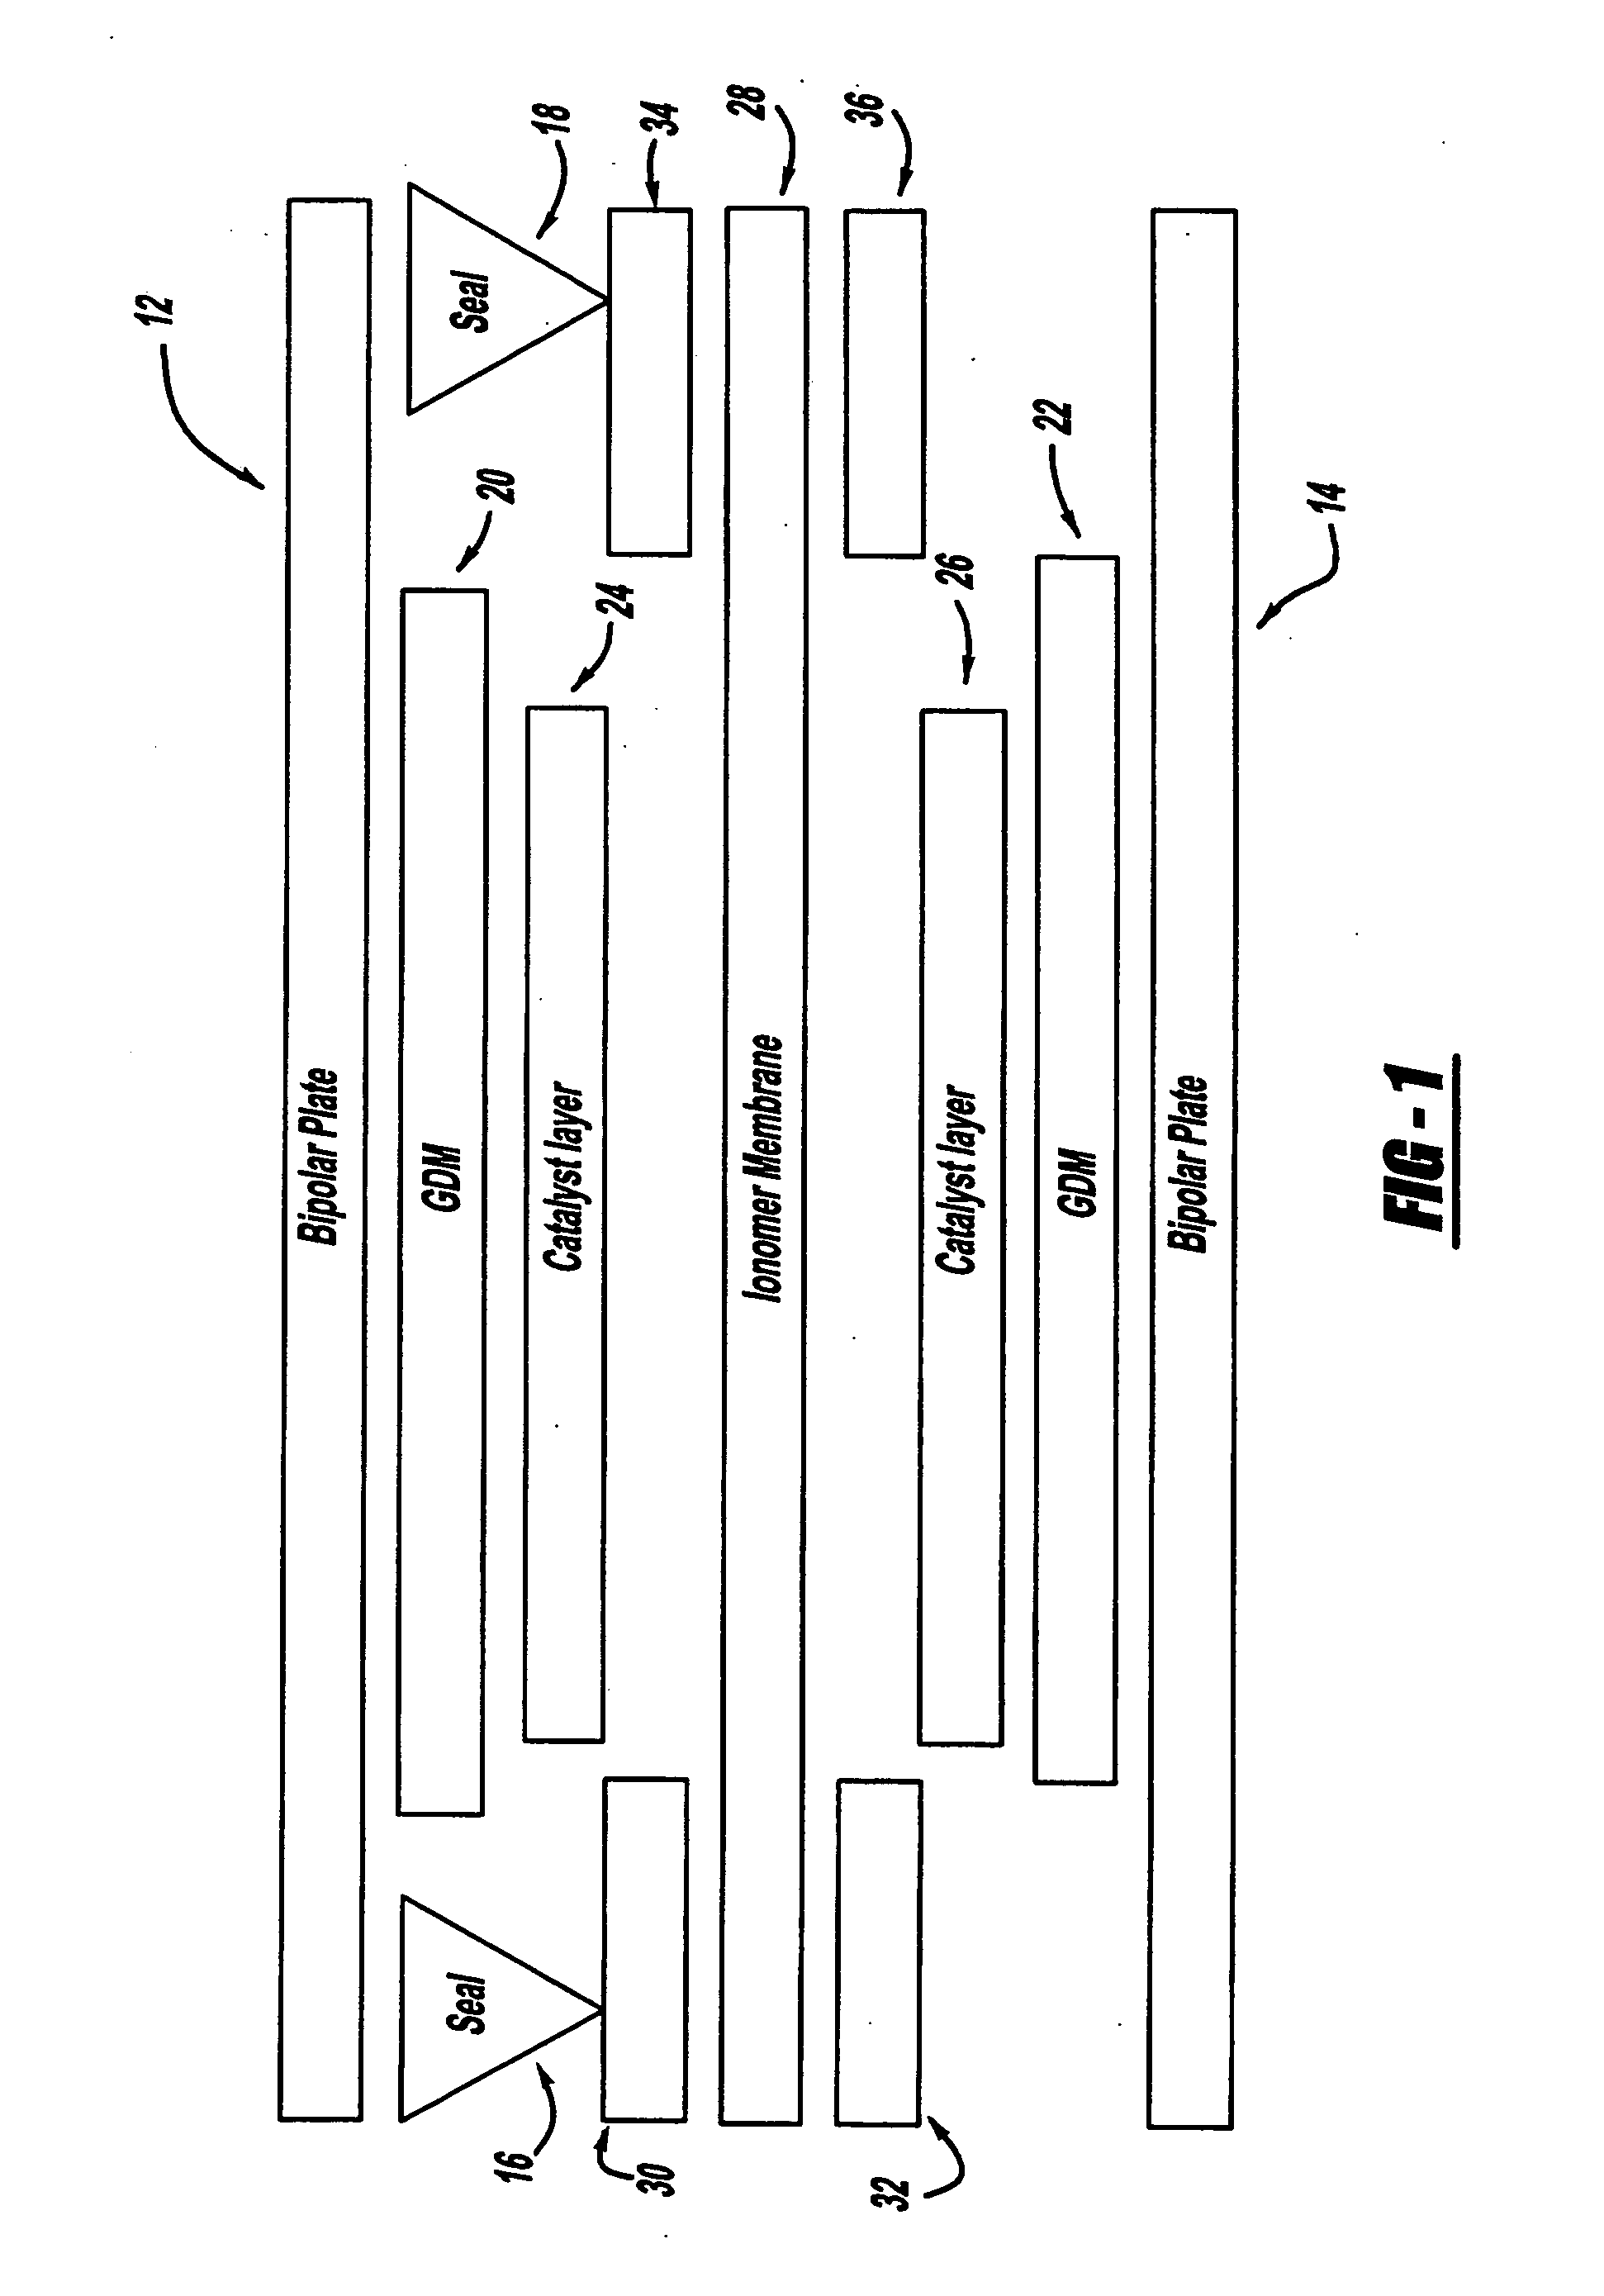 Manufacture or membrane electrode assembly with edge protection for PEM fuel cells